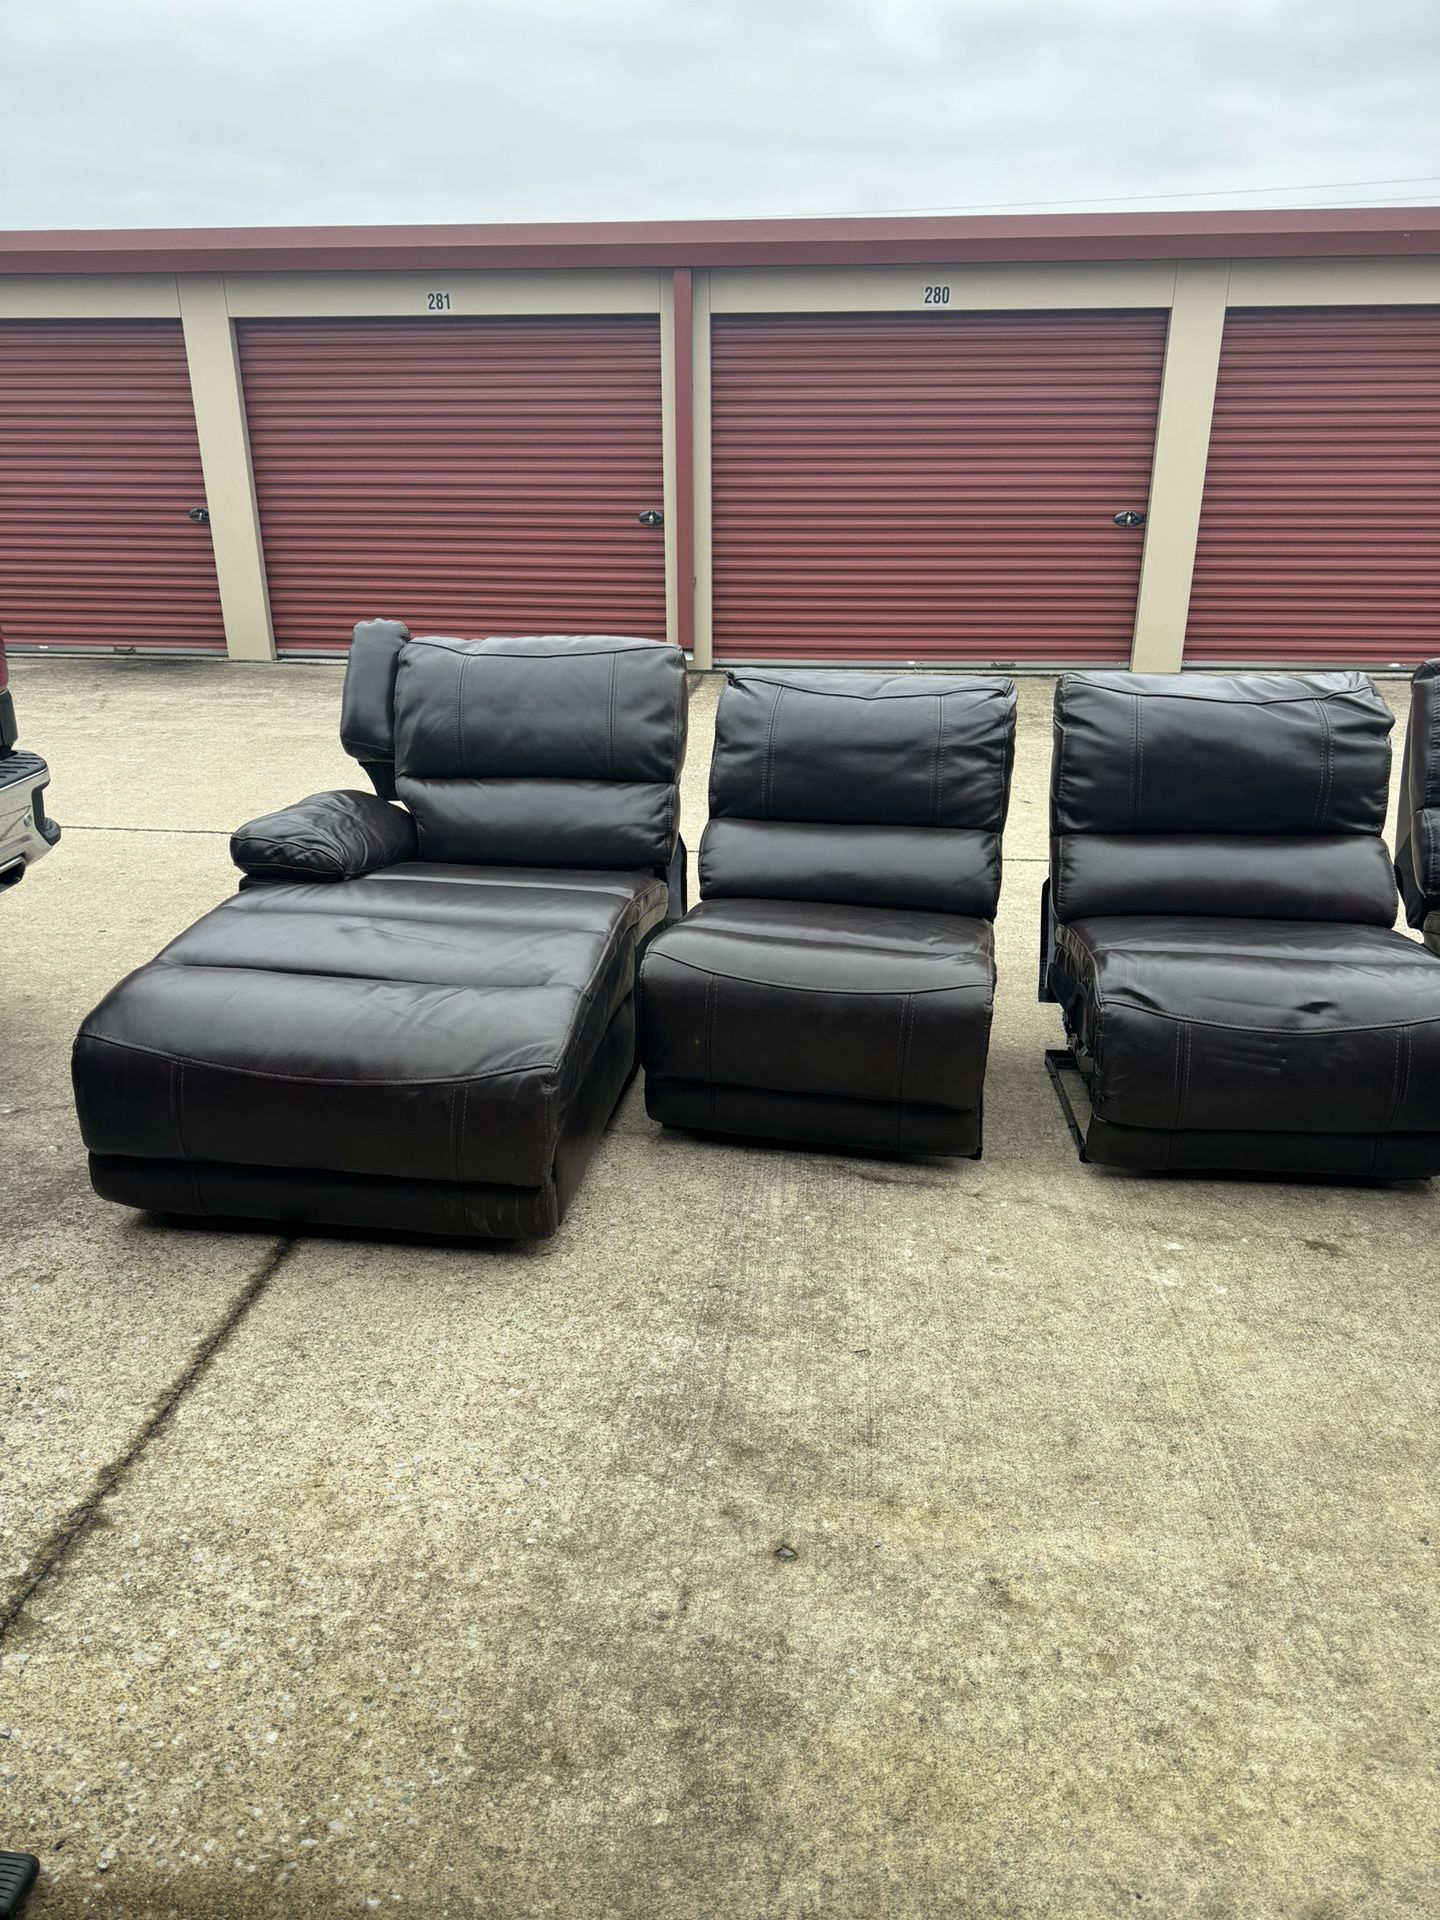 Leather Couch set for sale $400 OBO